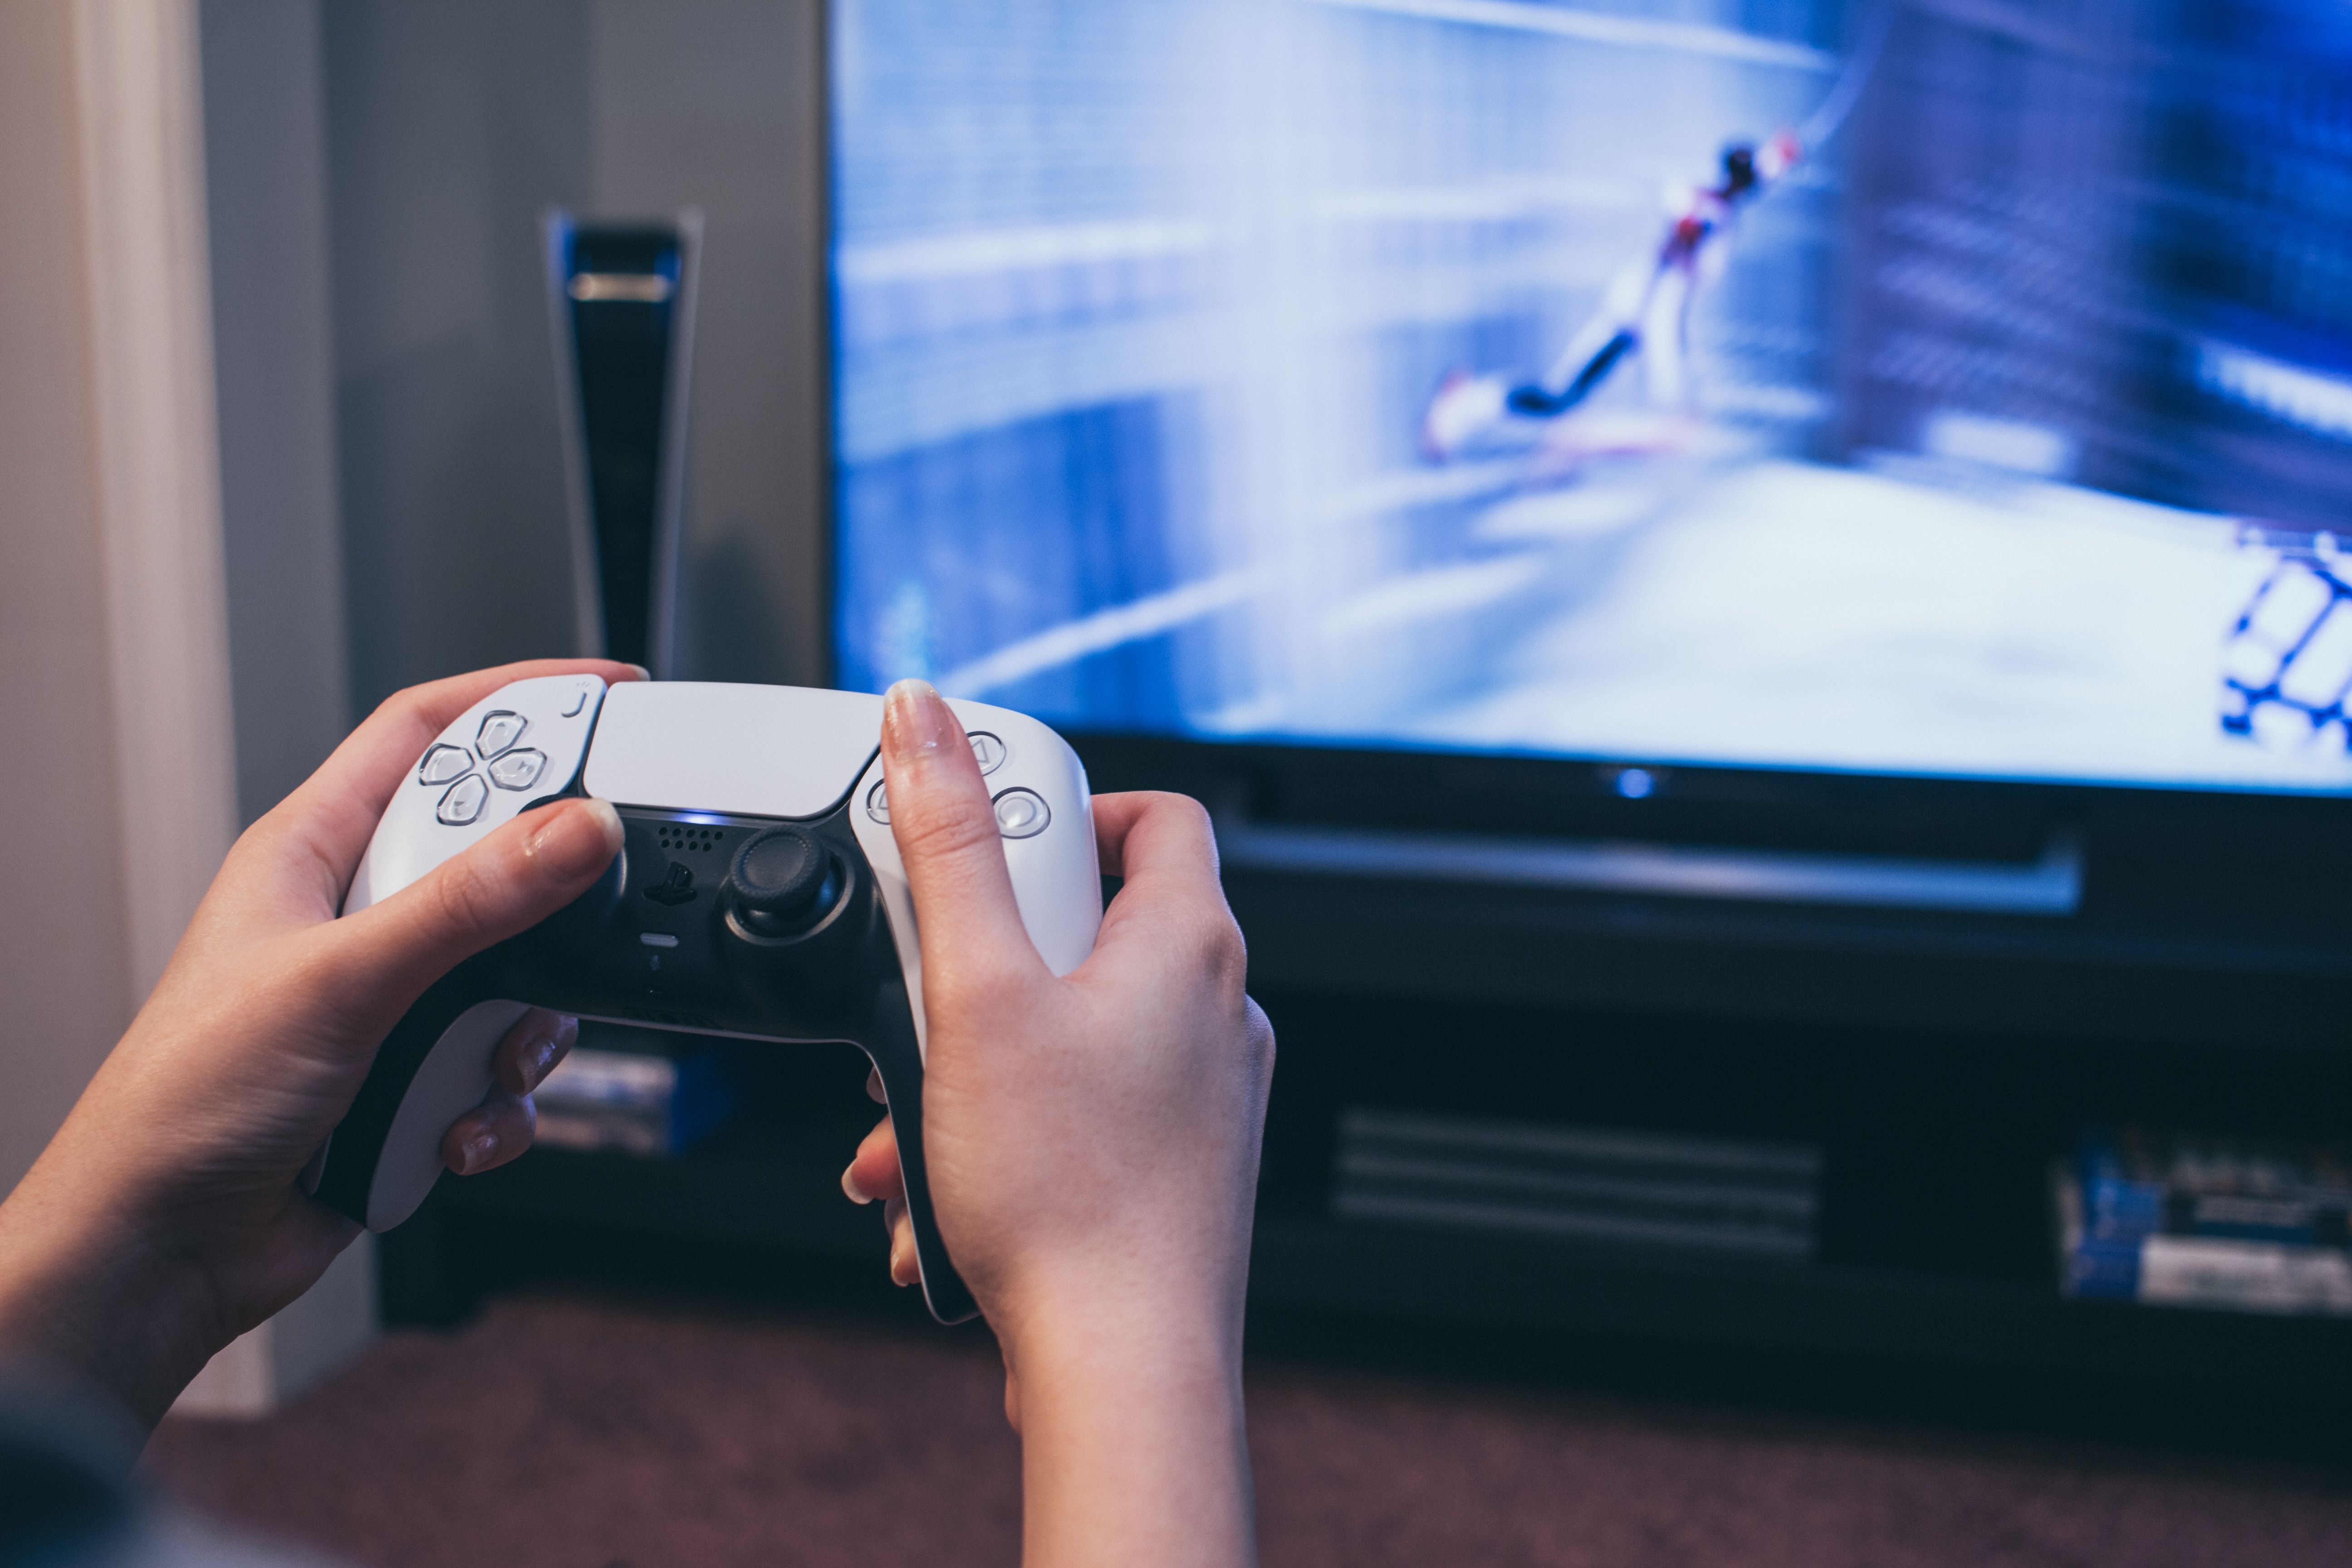 Hands holding a PlayStation 5 controller in front of a TV.